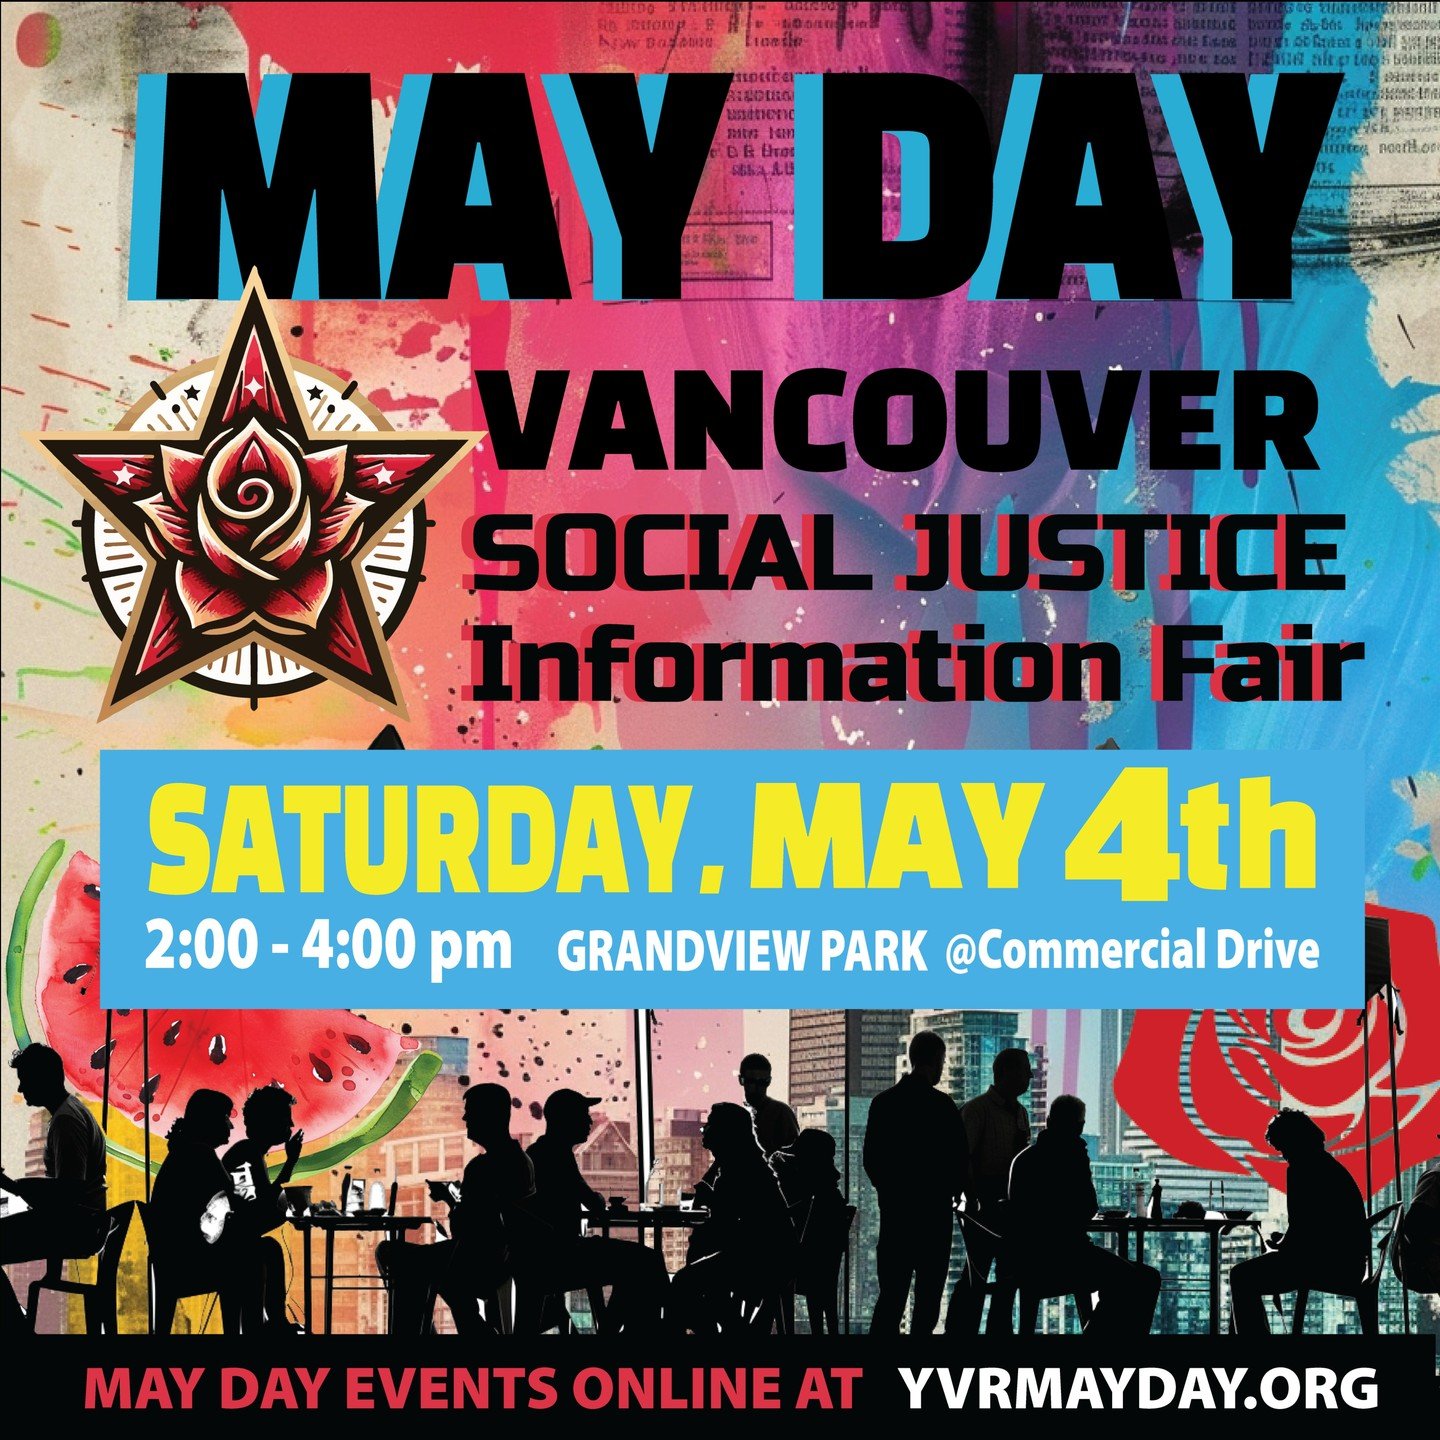 Come join the DSOV and many other Social Justice groups at the annual May Day Social Justice Information Fair.

**NOTE NEW DATE**

SATURDAY
May4TH, 2024

2:00 pm - 4:00 pm
Grandview Park
1200 block of Commercial Drive, Vancouver

yvrmayday.org

The V